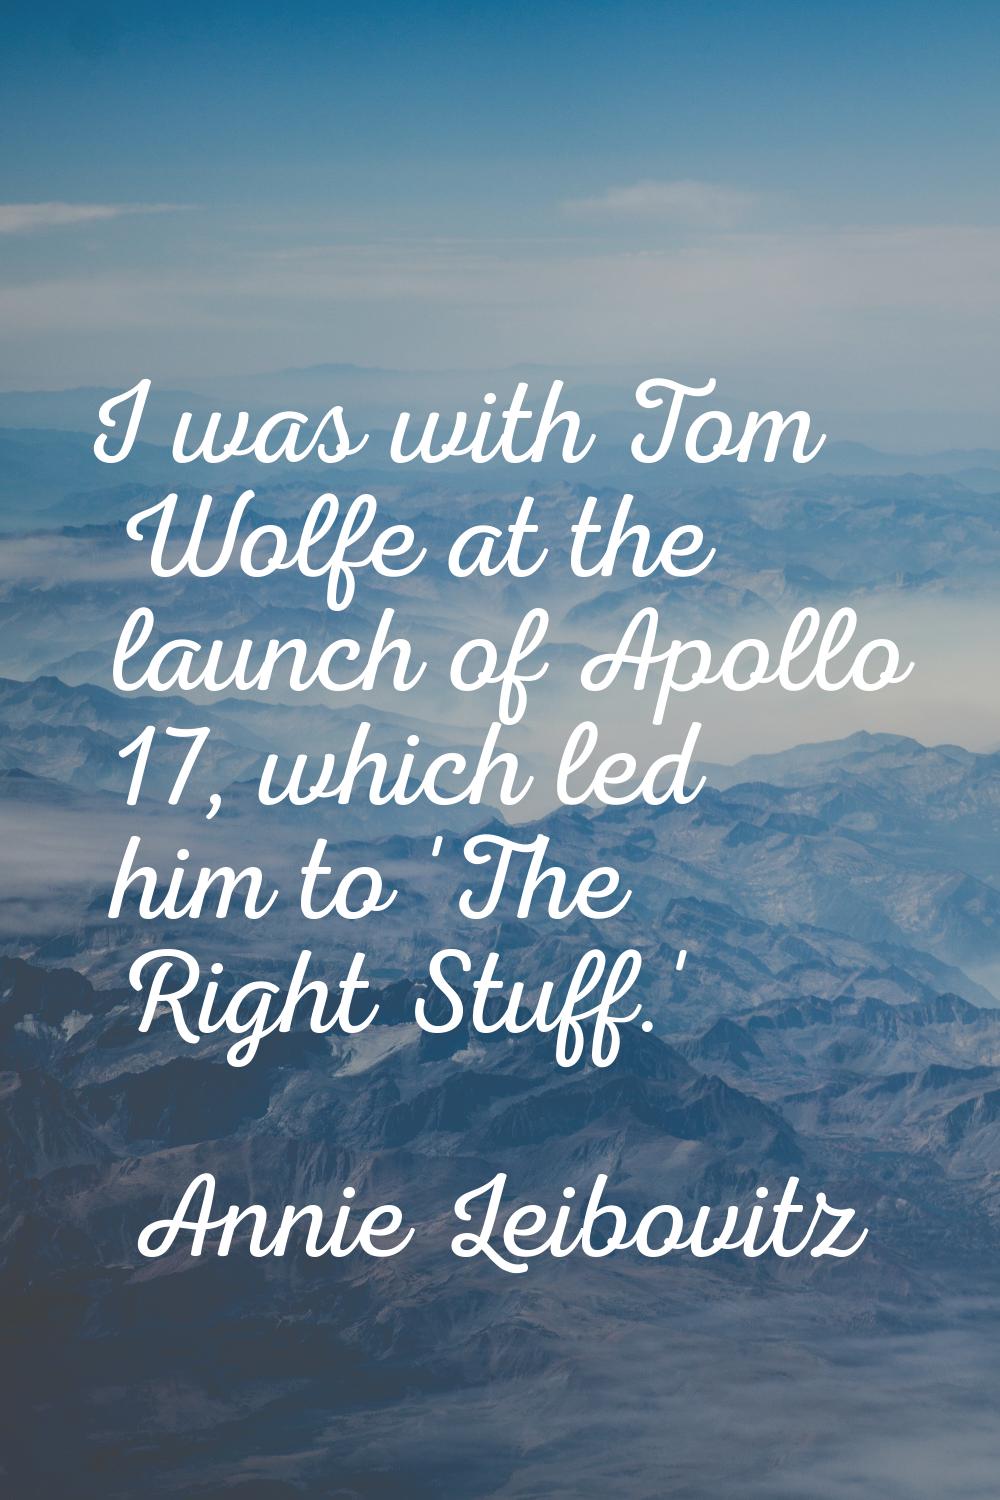 I was with Tom Wolfe at the launch of Apollo 17, which led him to 'The Right Stuff.'